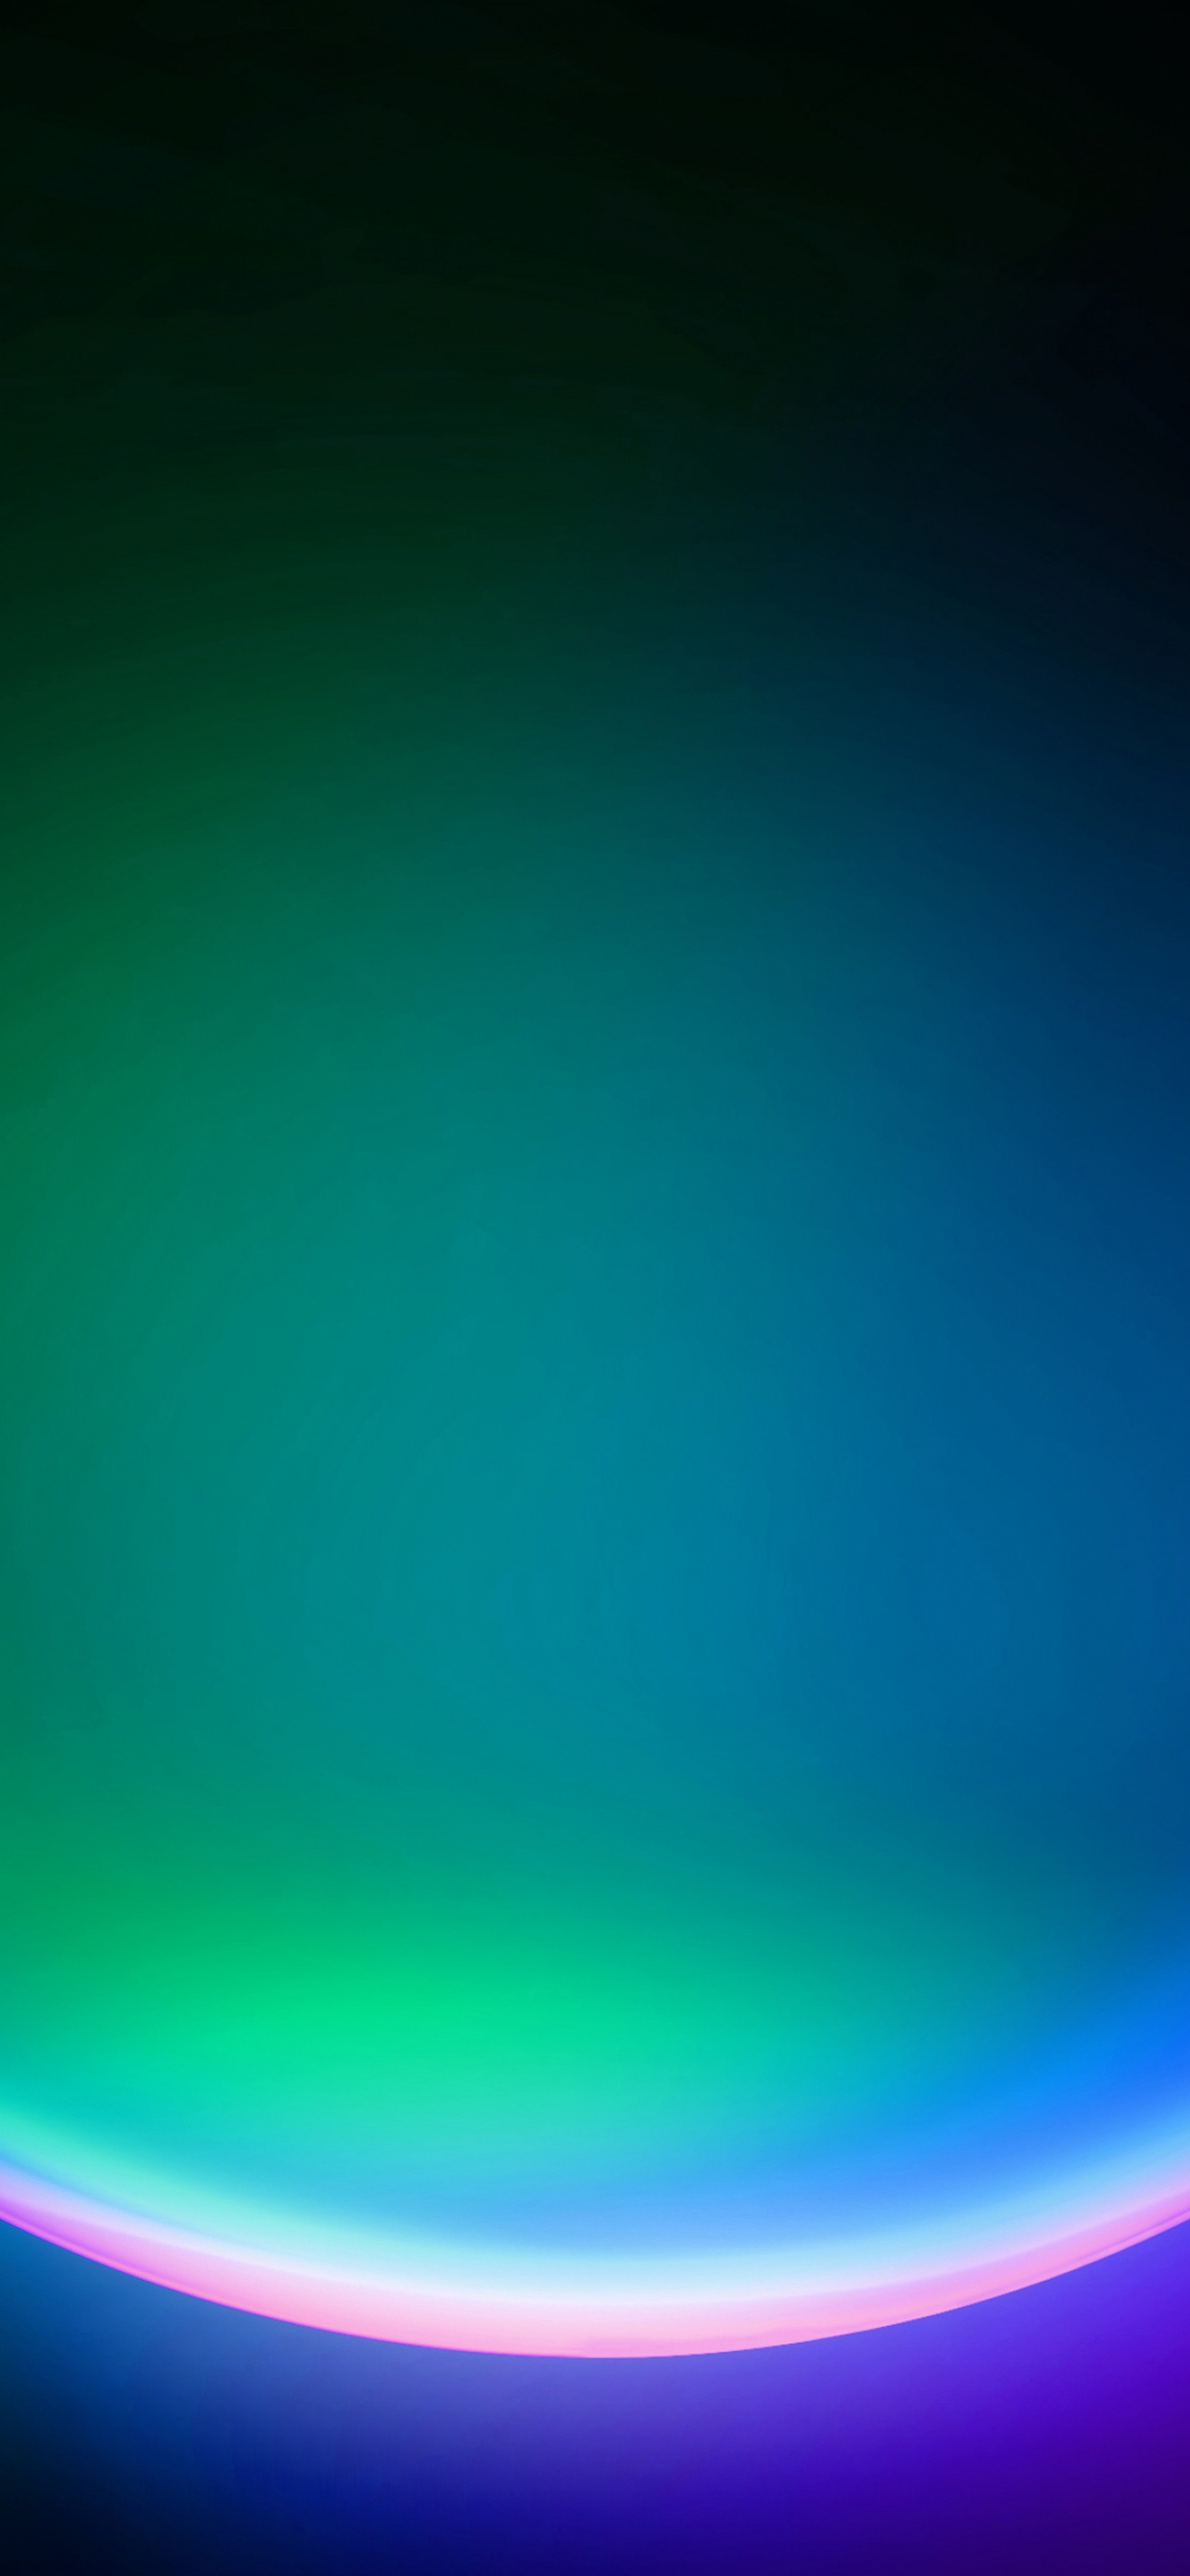 Windows 11 Wallpaper 4K, Stock, Official, Colorful, Gradients